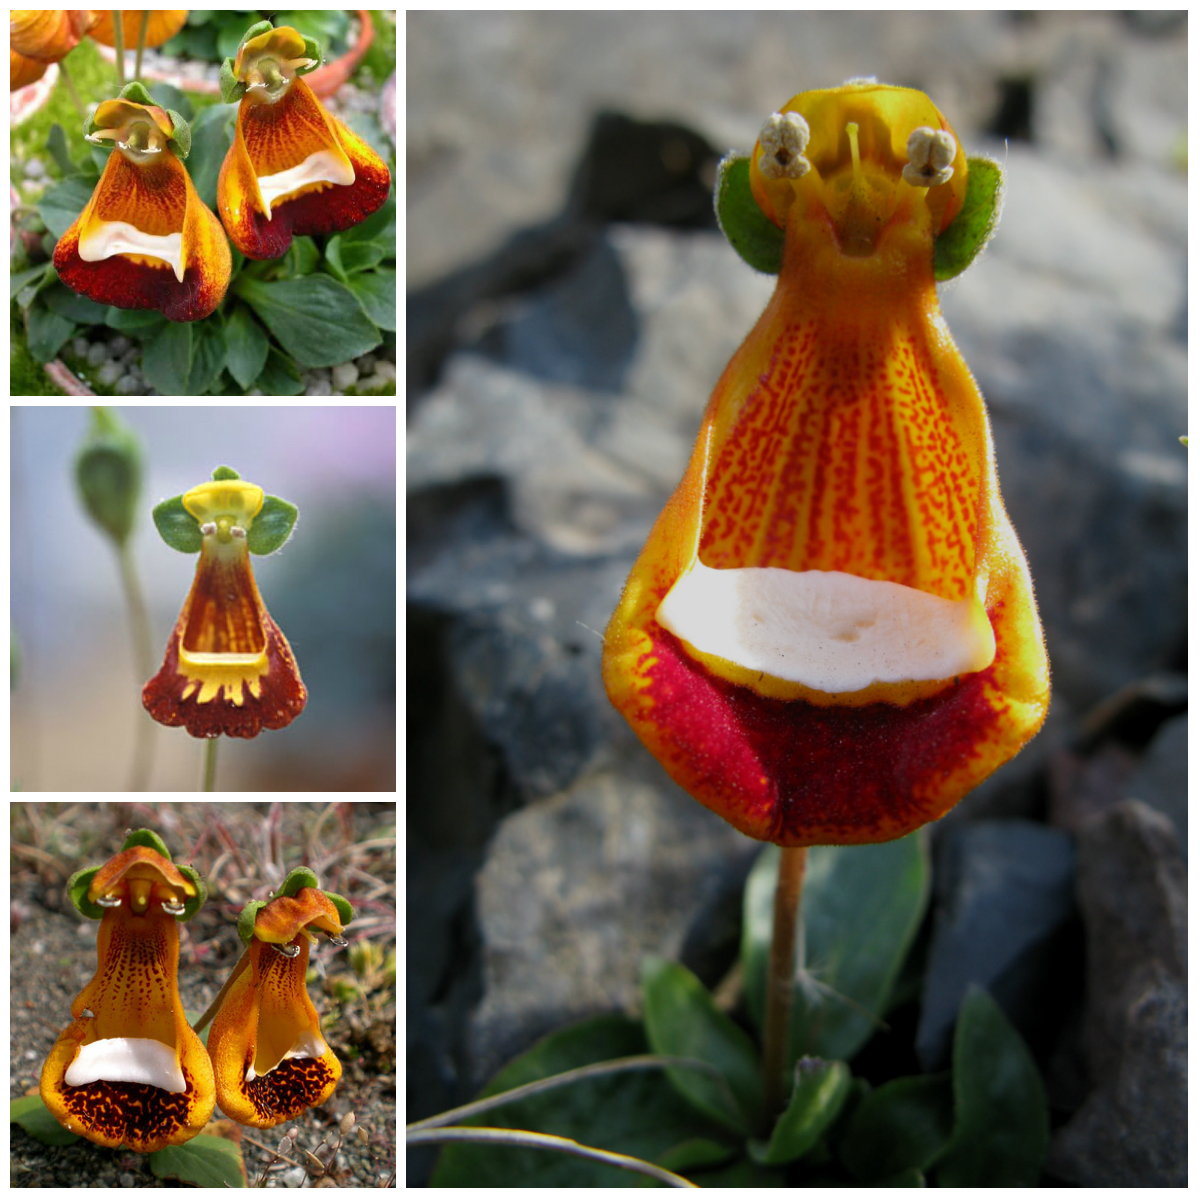 Flowers with the most unusual forms